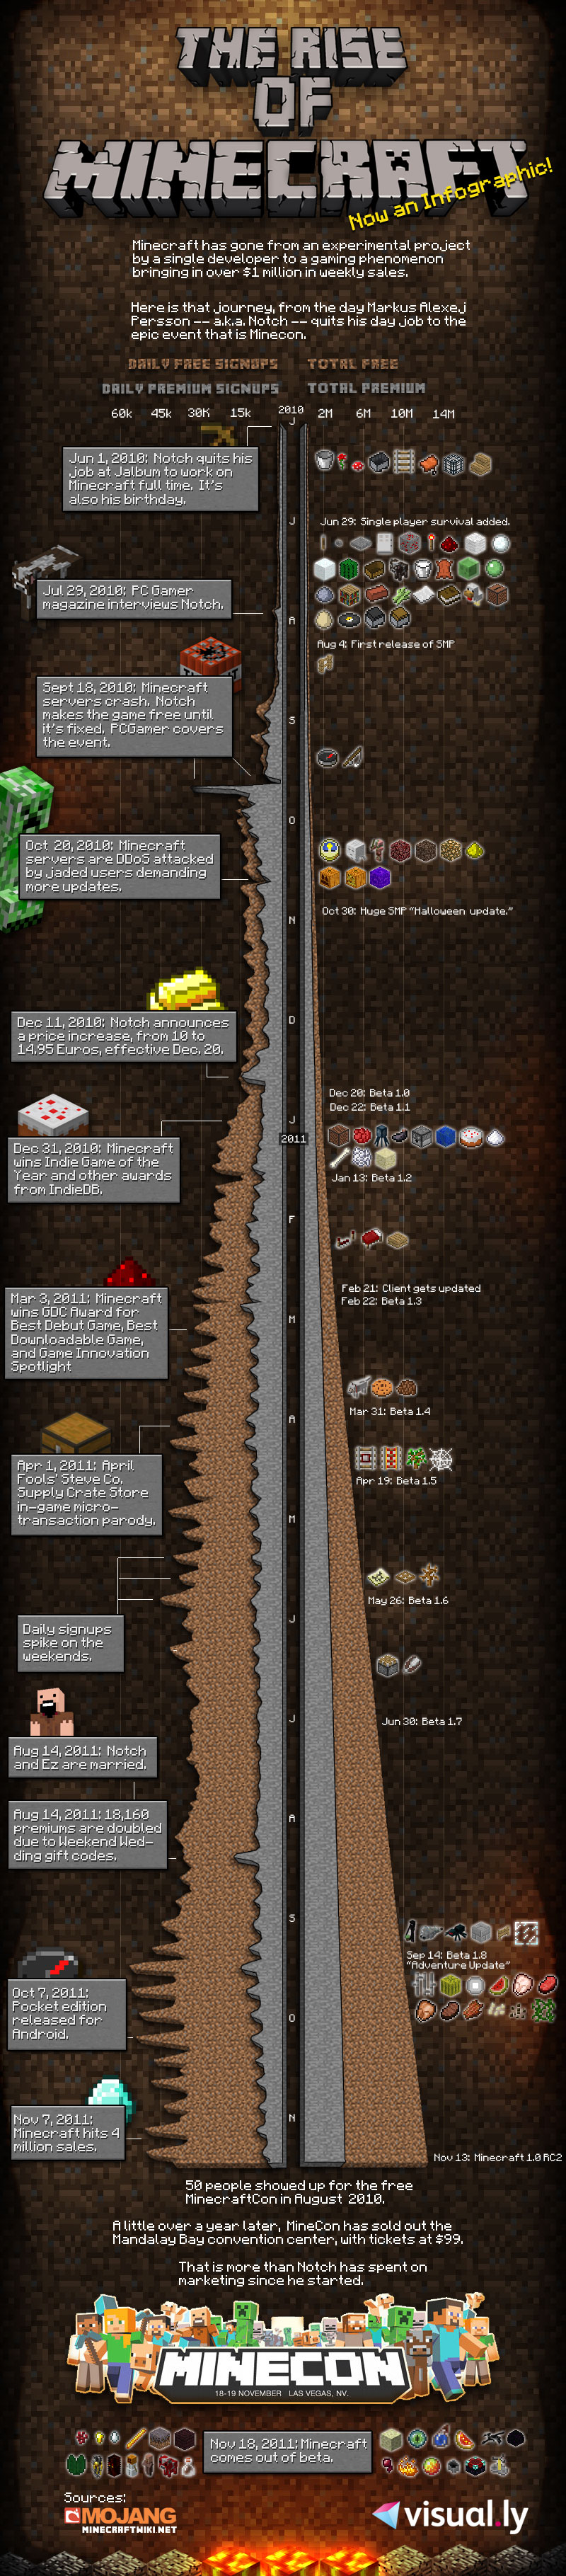 The Rise of Minecraft Infographic